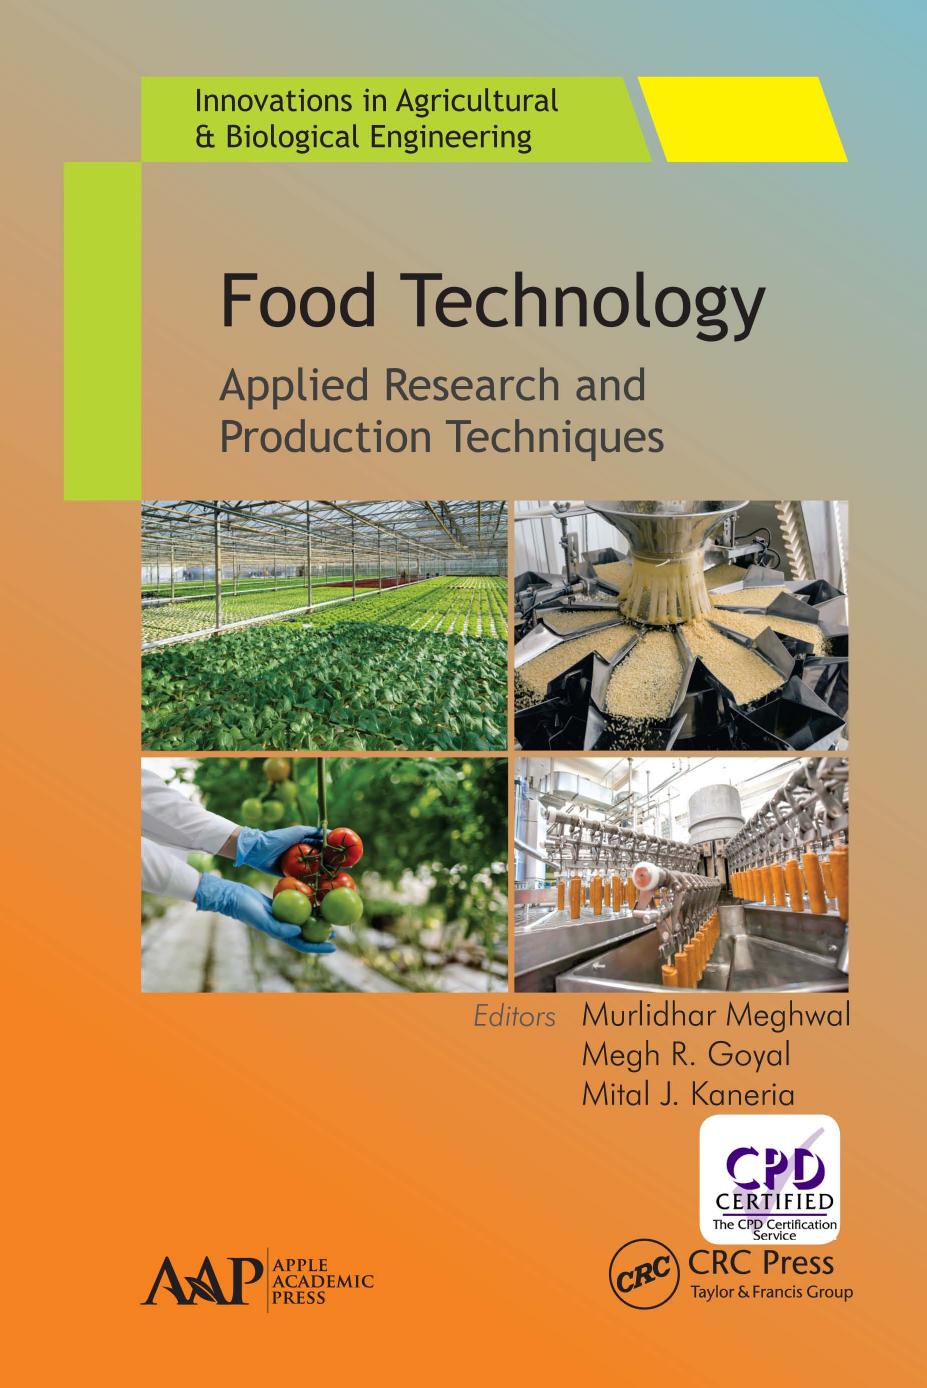 Food Technology, Applied Research